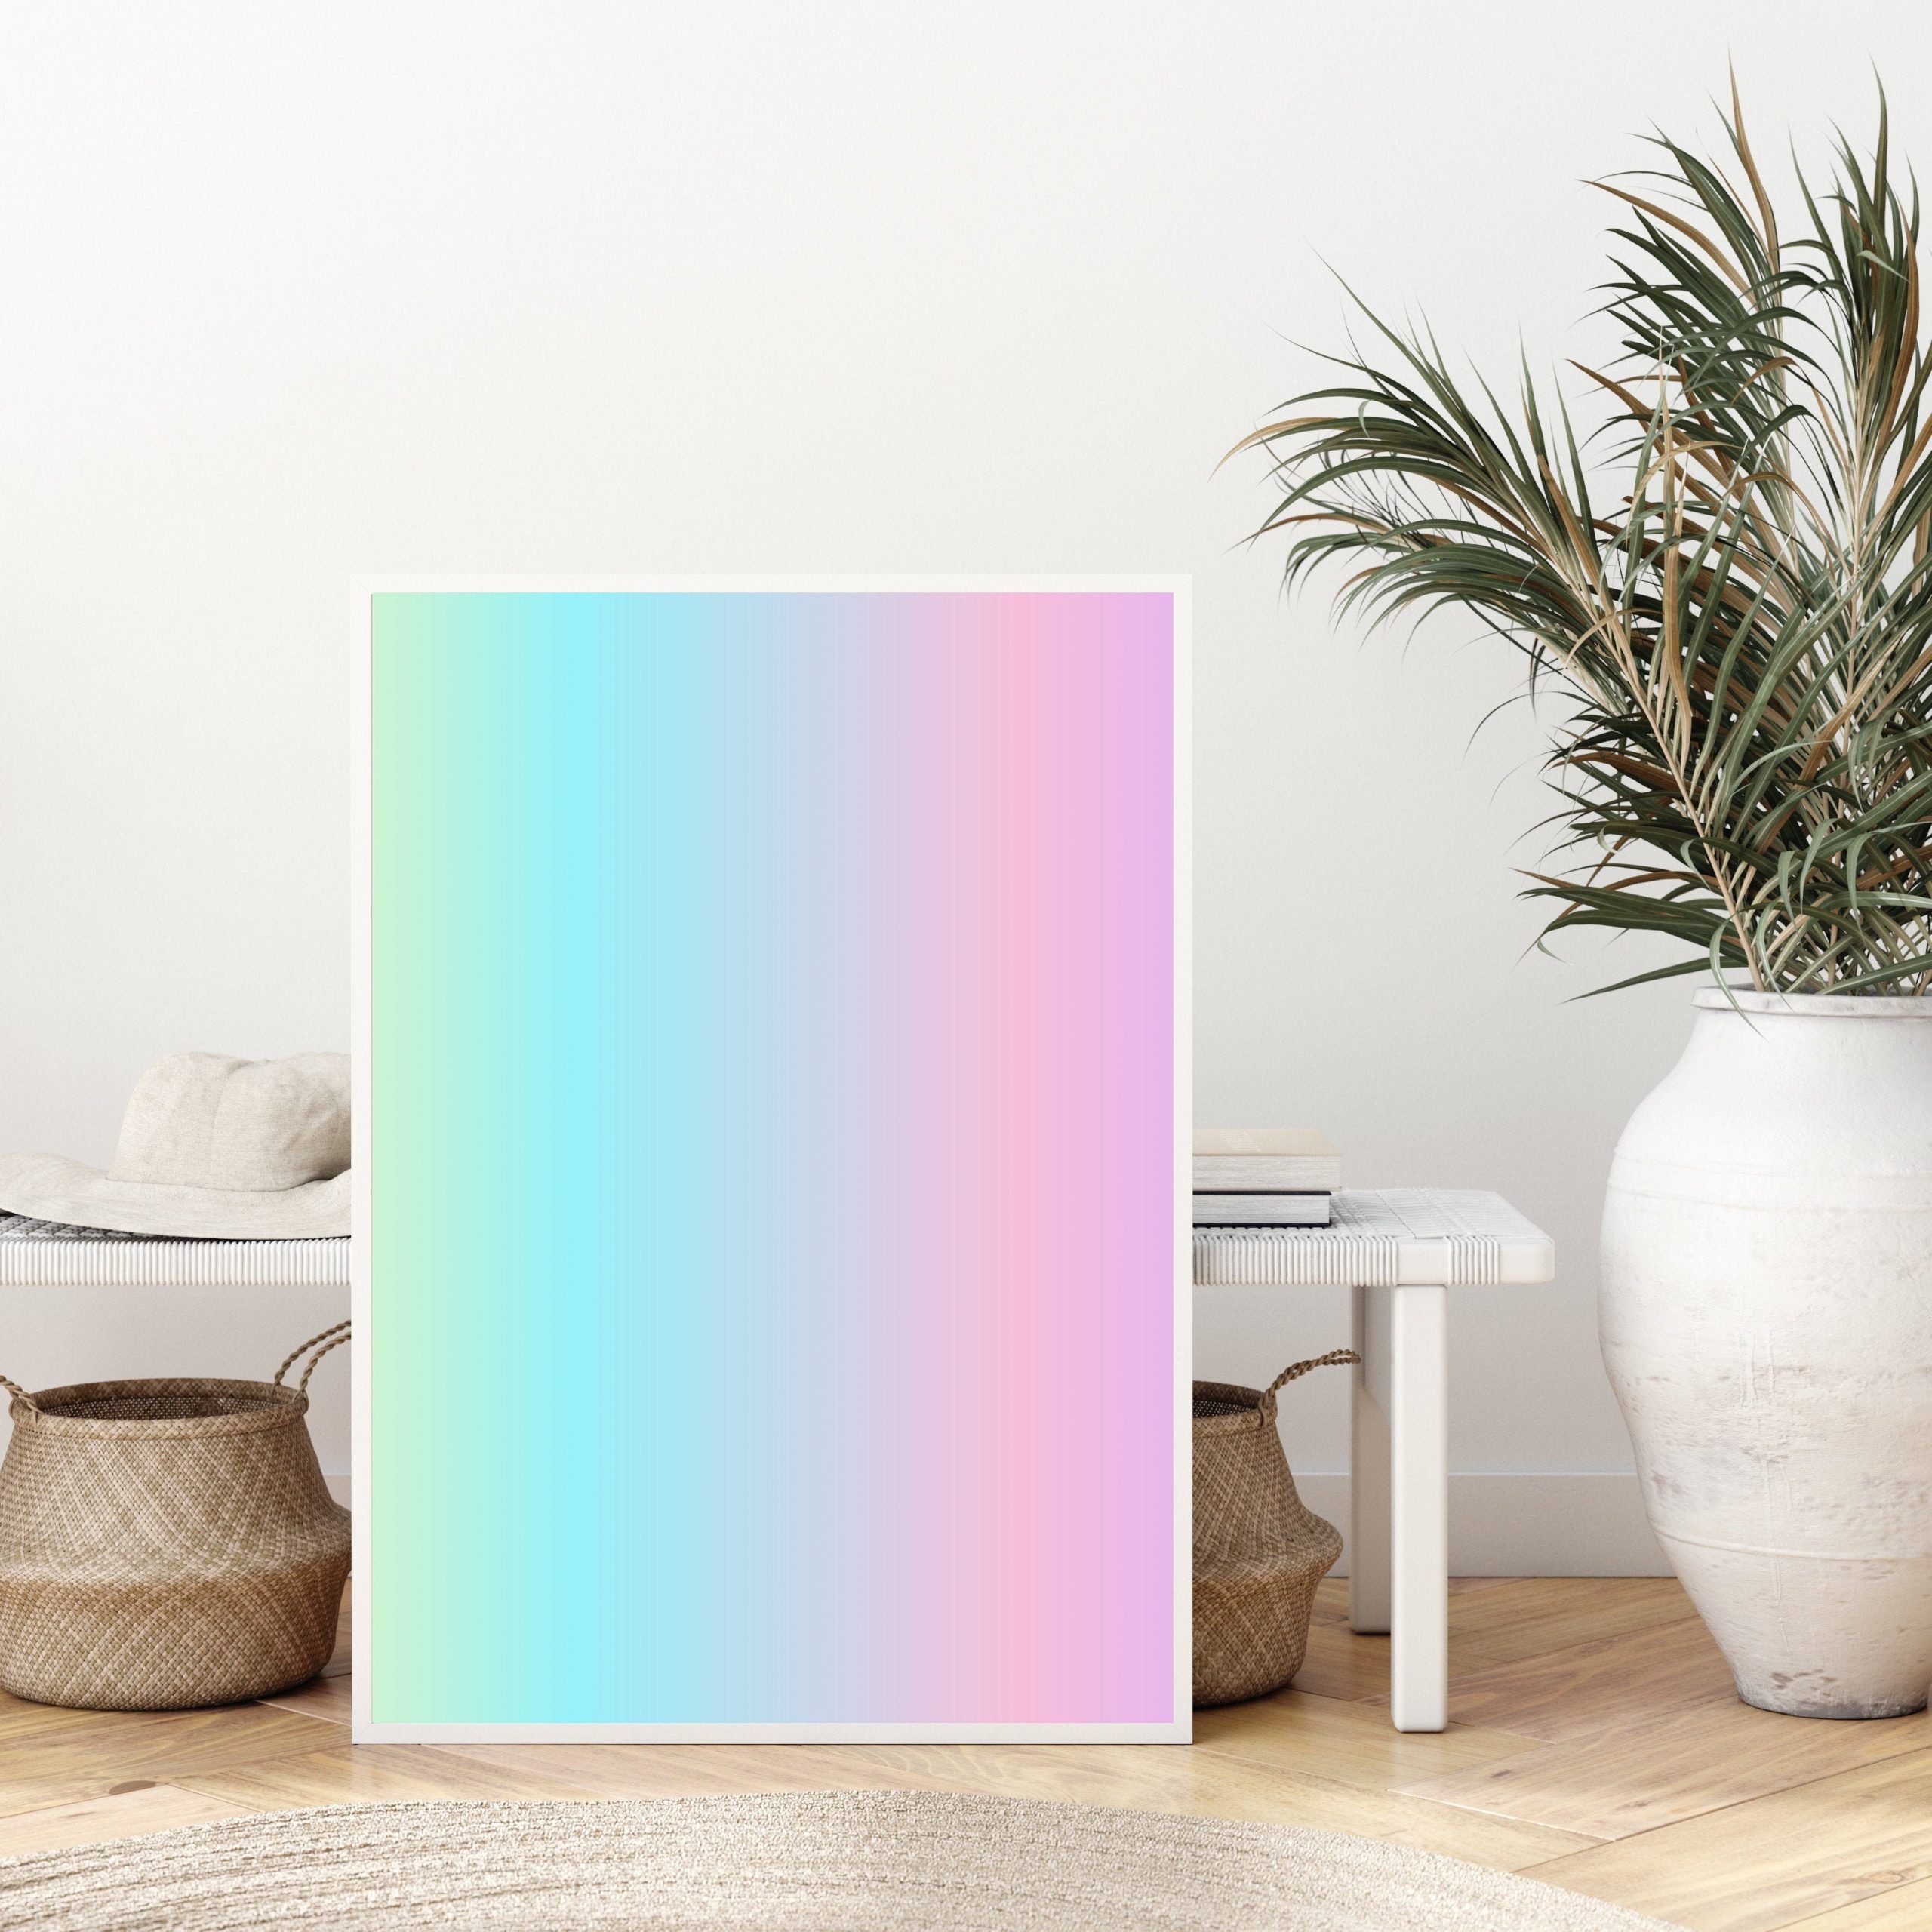 Gradient Print Wall Art Rainbow Poster Digital Aesthetic Intended For Most Recently Released Gradient Wall Art (View 20 of 20)